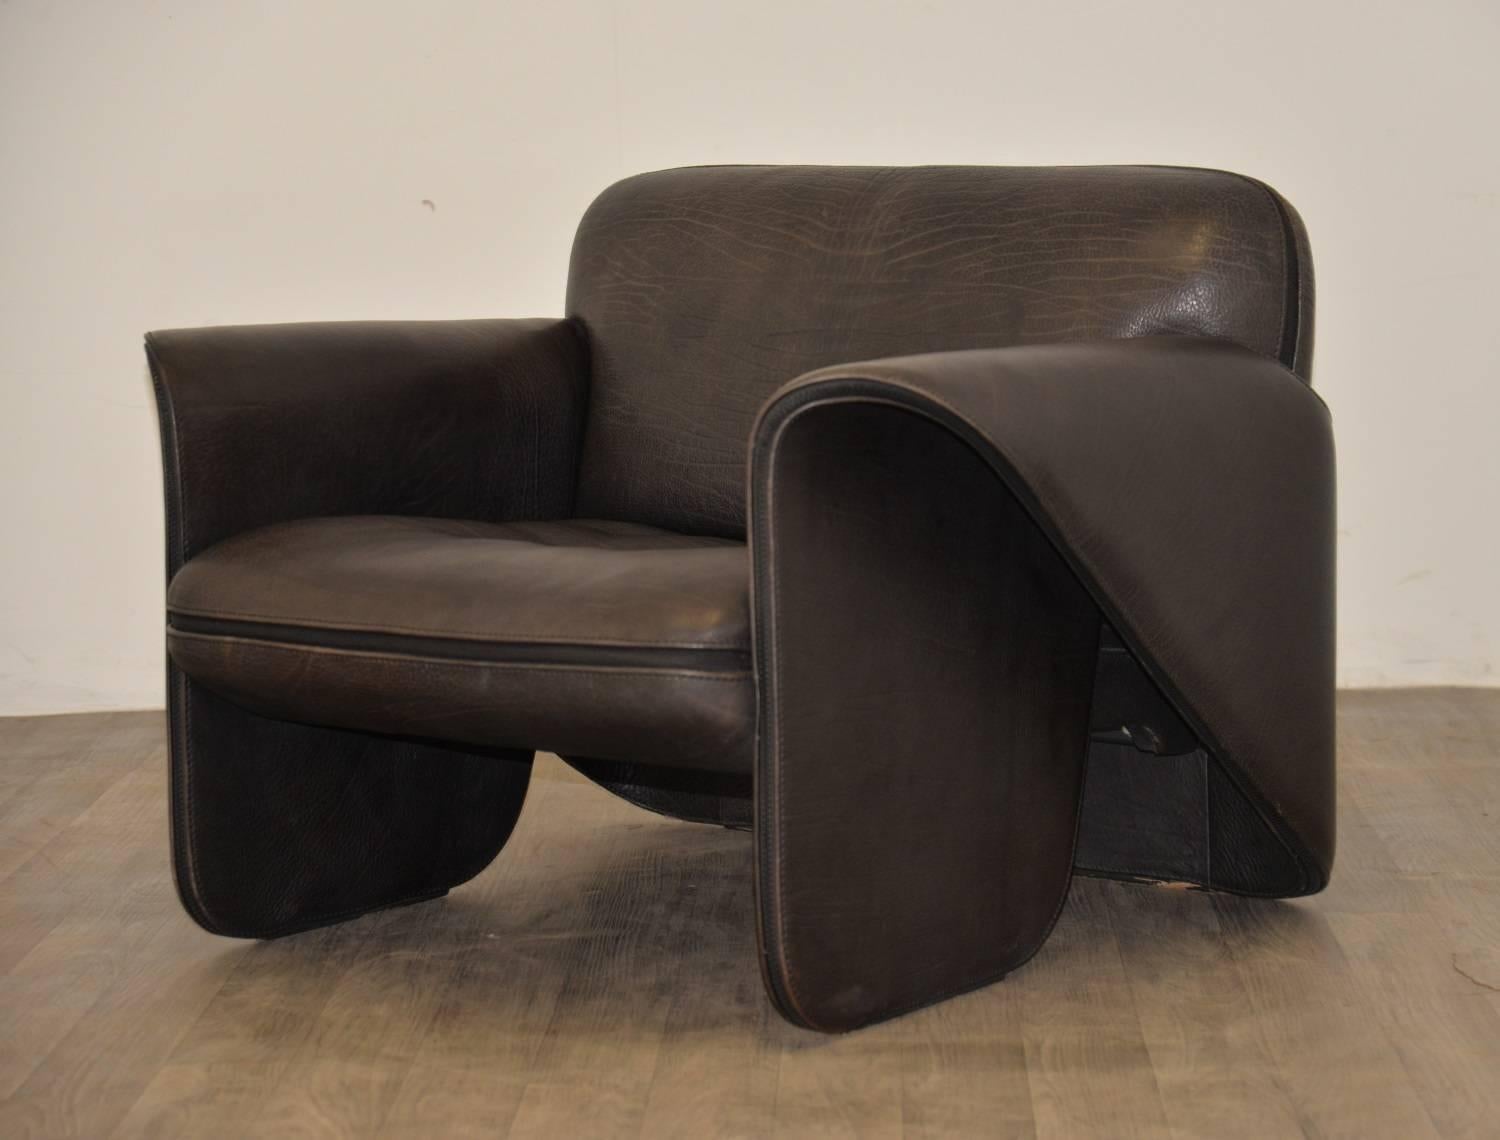 Late 20th Century Vintage Swiss de Sede 'DS 125' Sofa and Armchair Designed by Gerd Lange, 1978